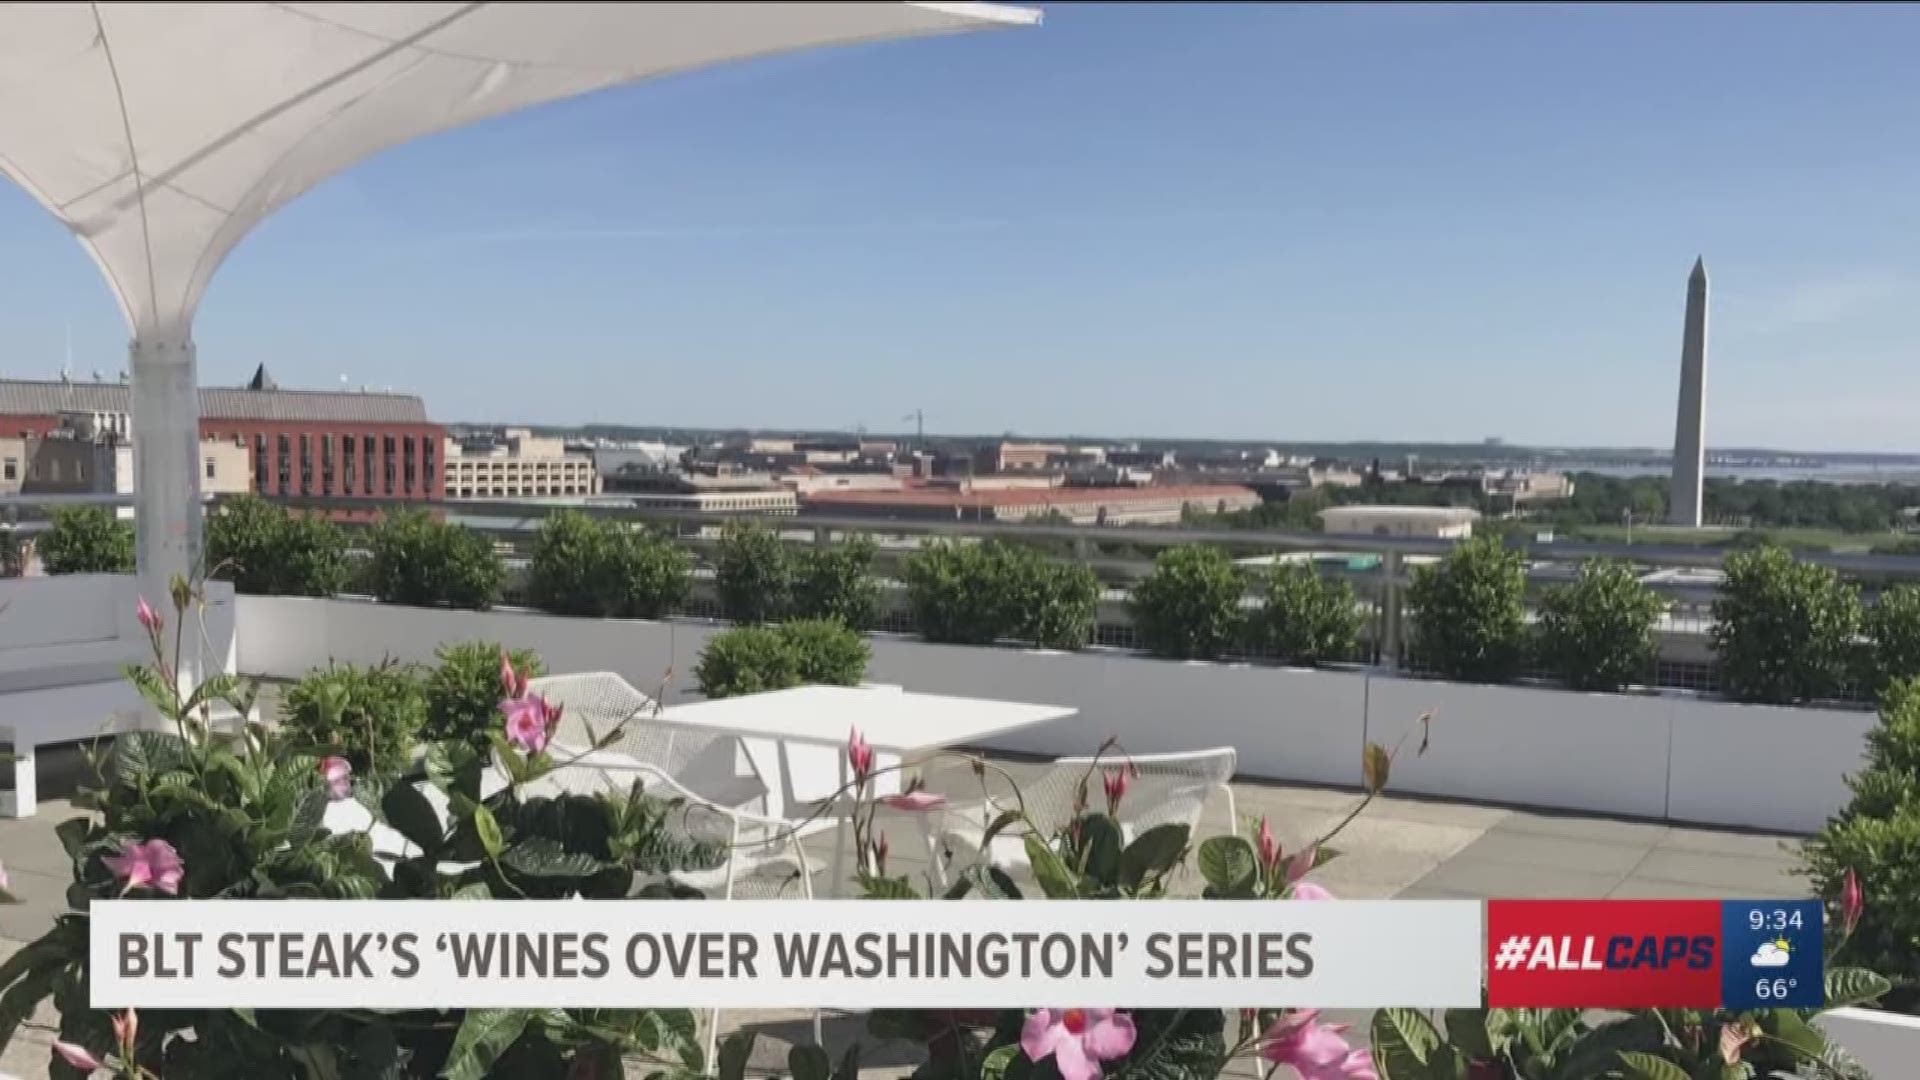 It's "Wines over Washington" season at BLT Steak DC which means that you get to enjoy their delicious food and a rooftop view overlooking the beautiful DC Skyline. The event takes place on select Thursdays through September 2019 so make sure to get your tickets now!